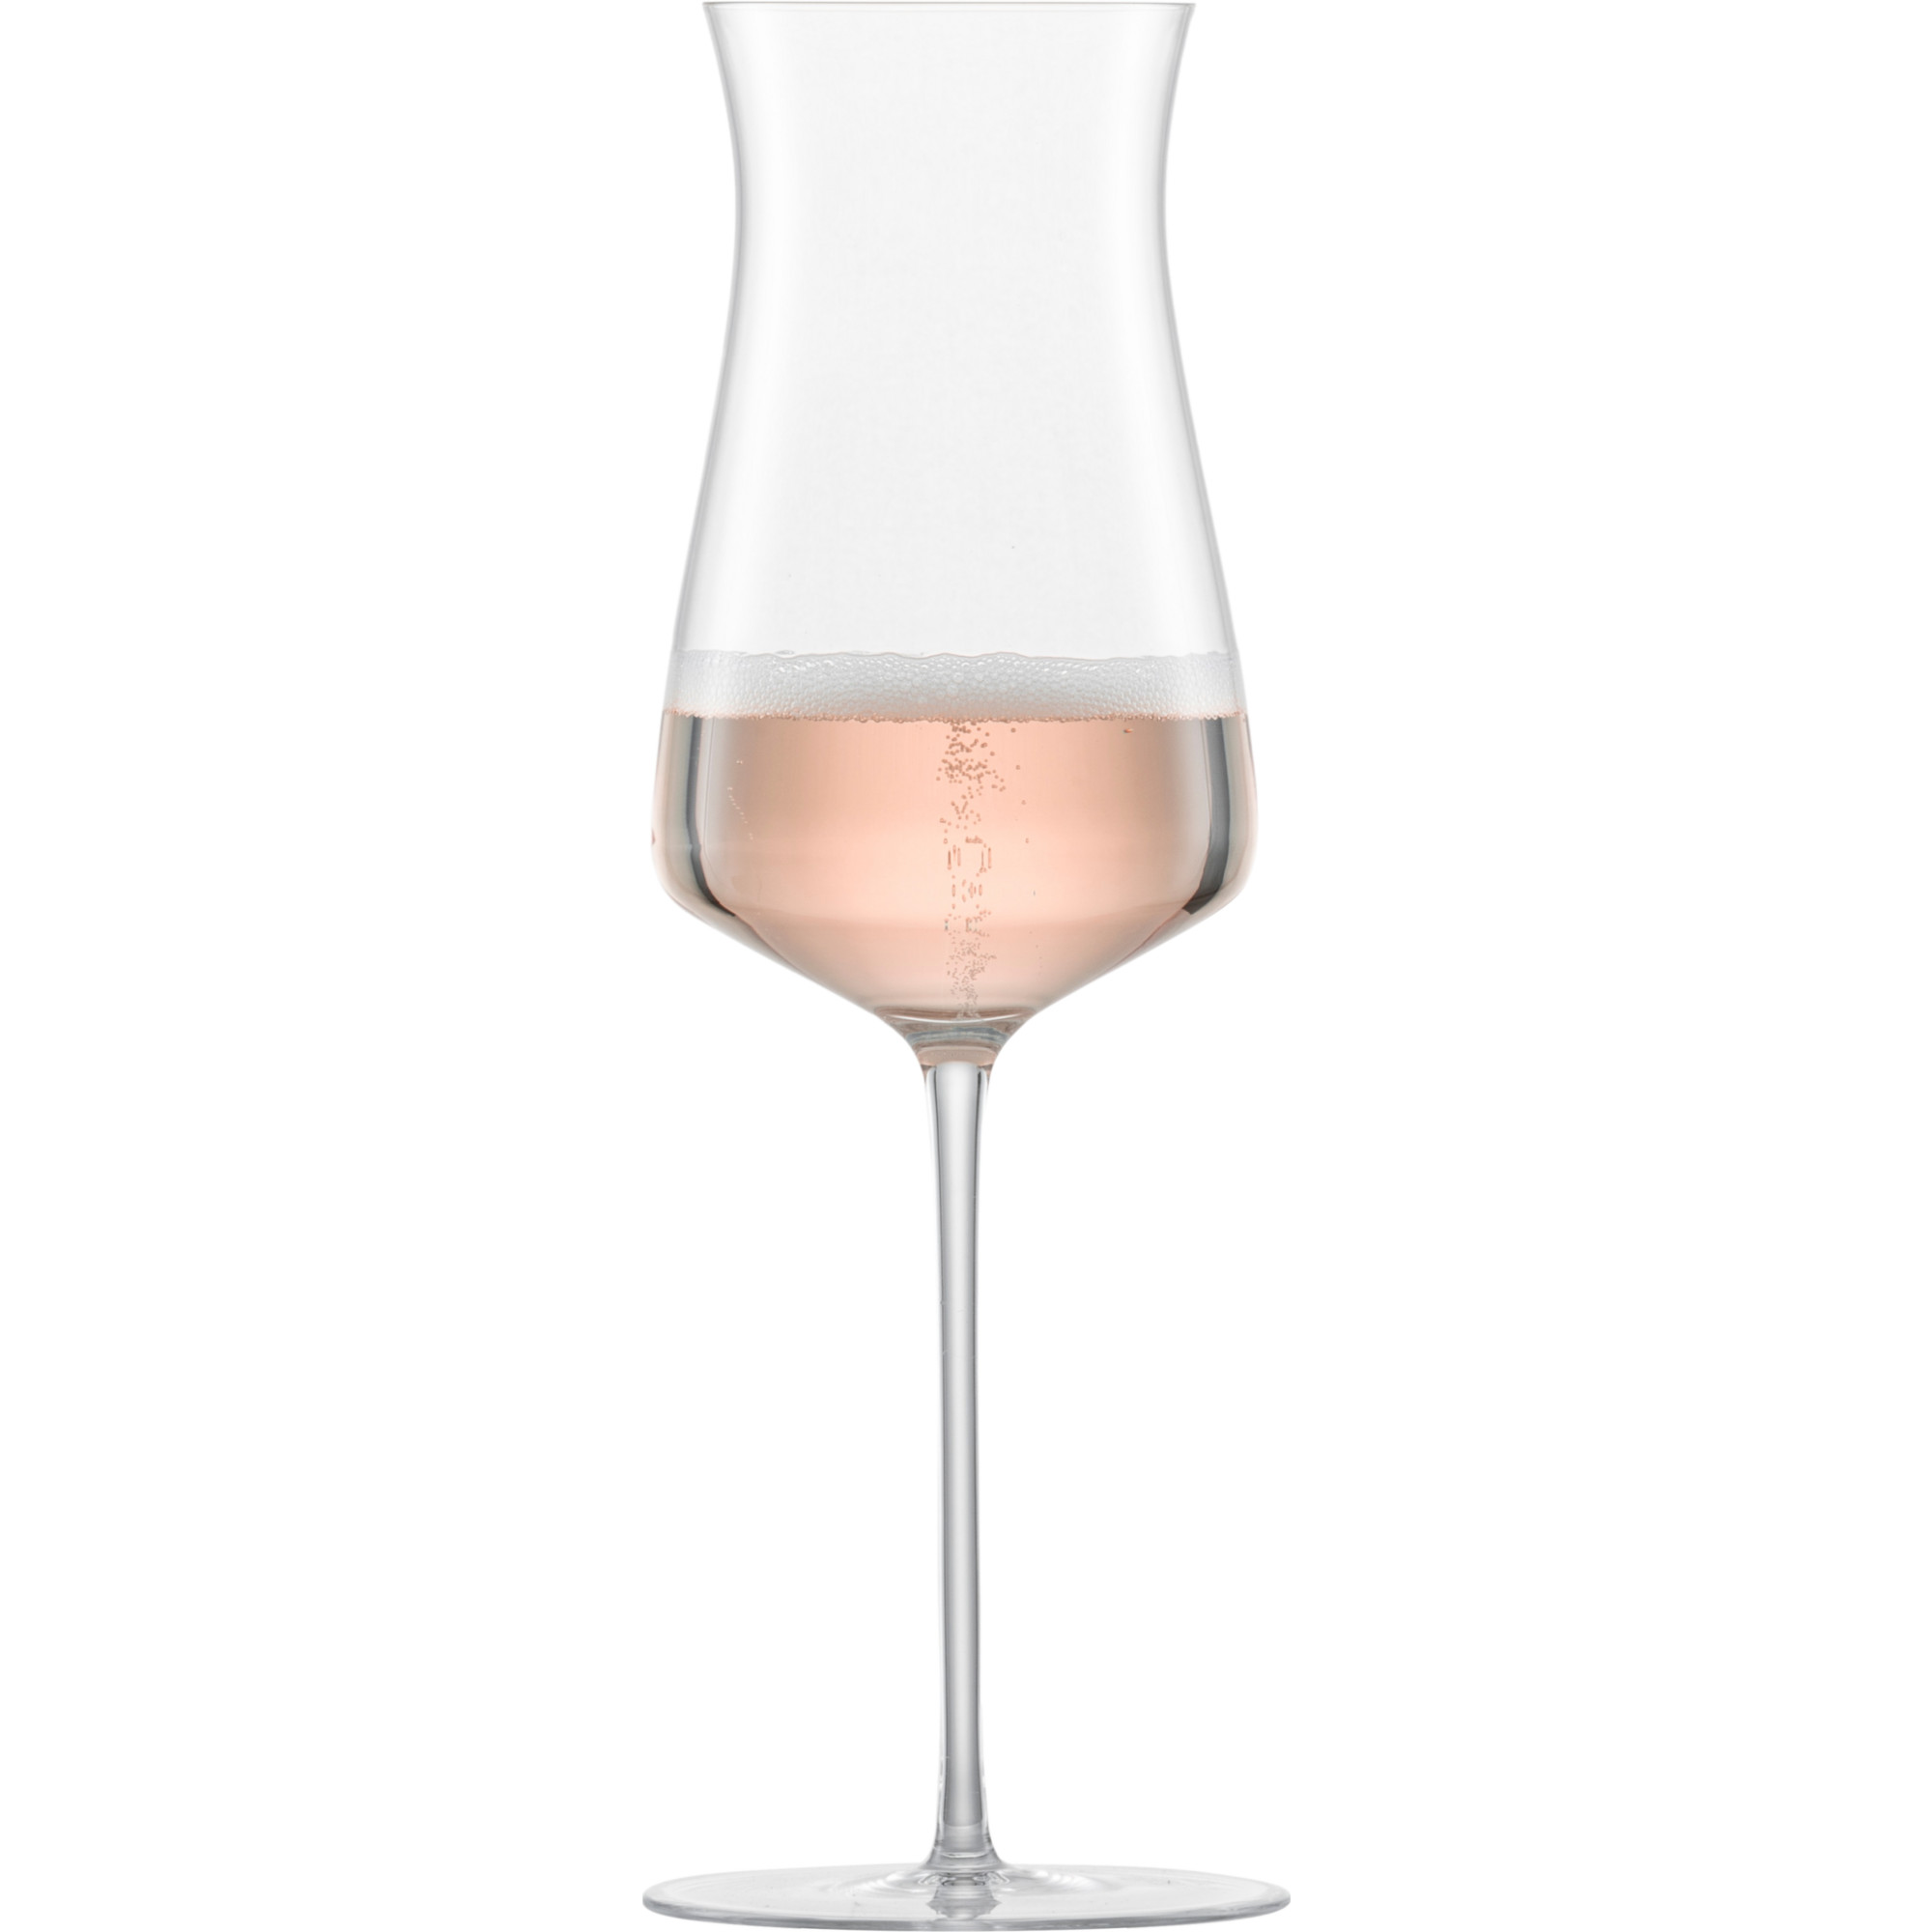 The Moment Rosé Champagnerglas